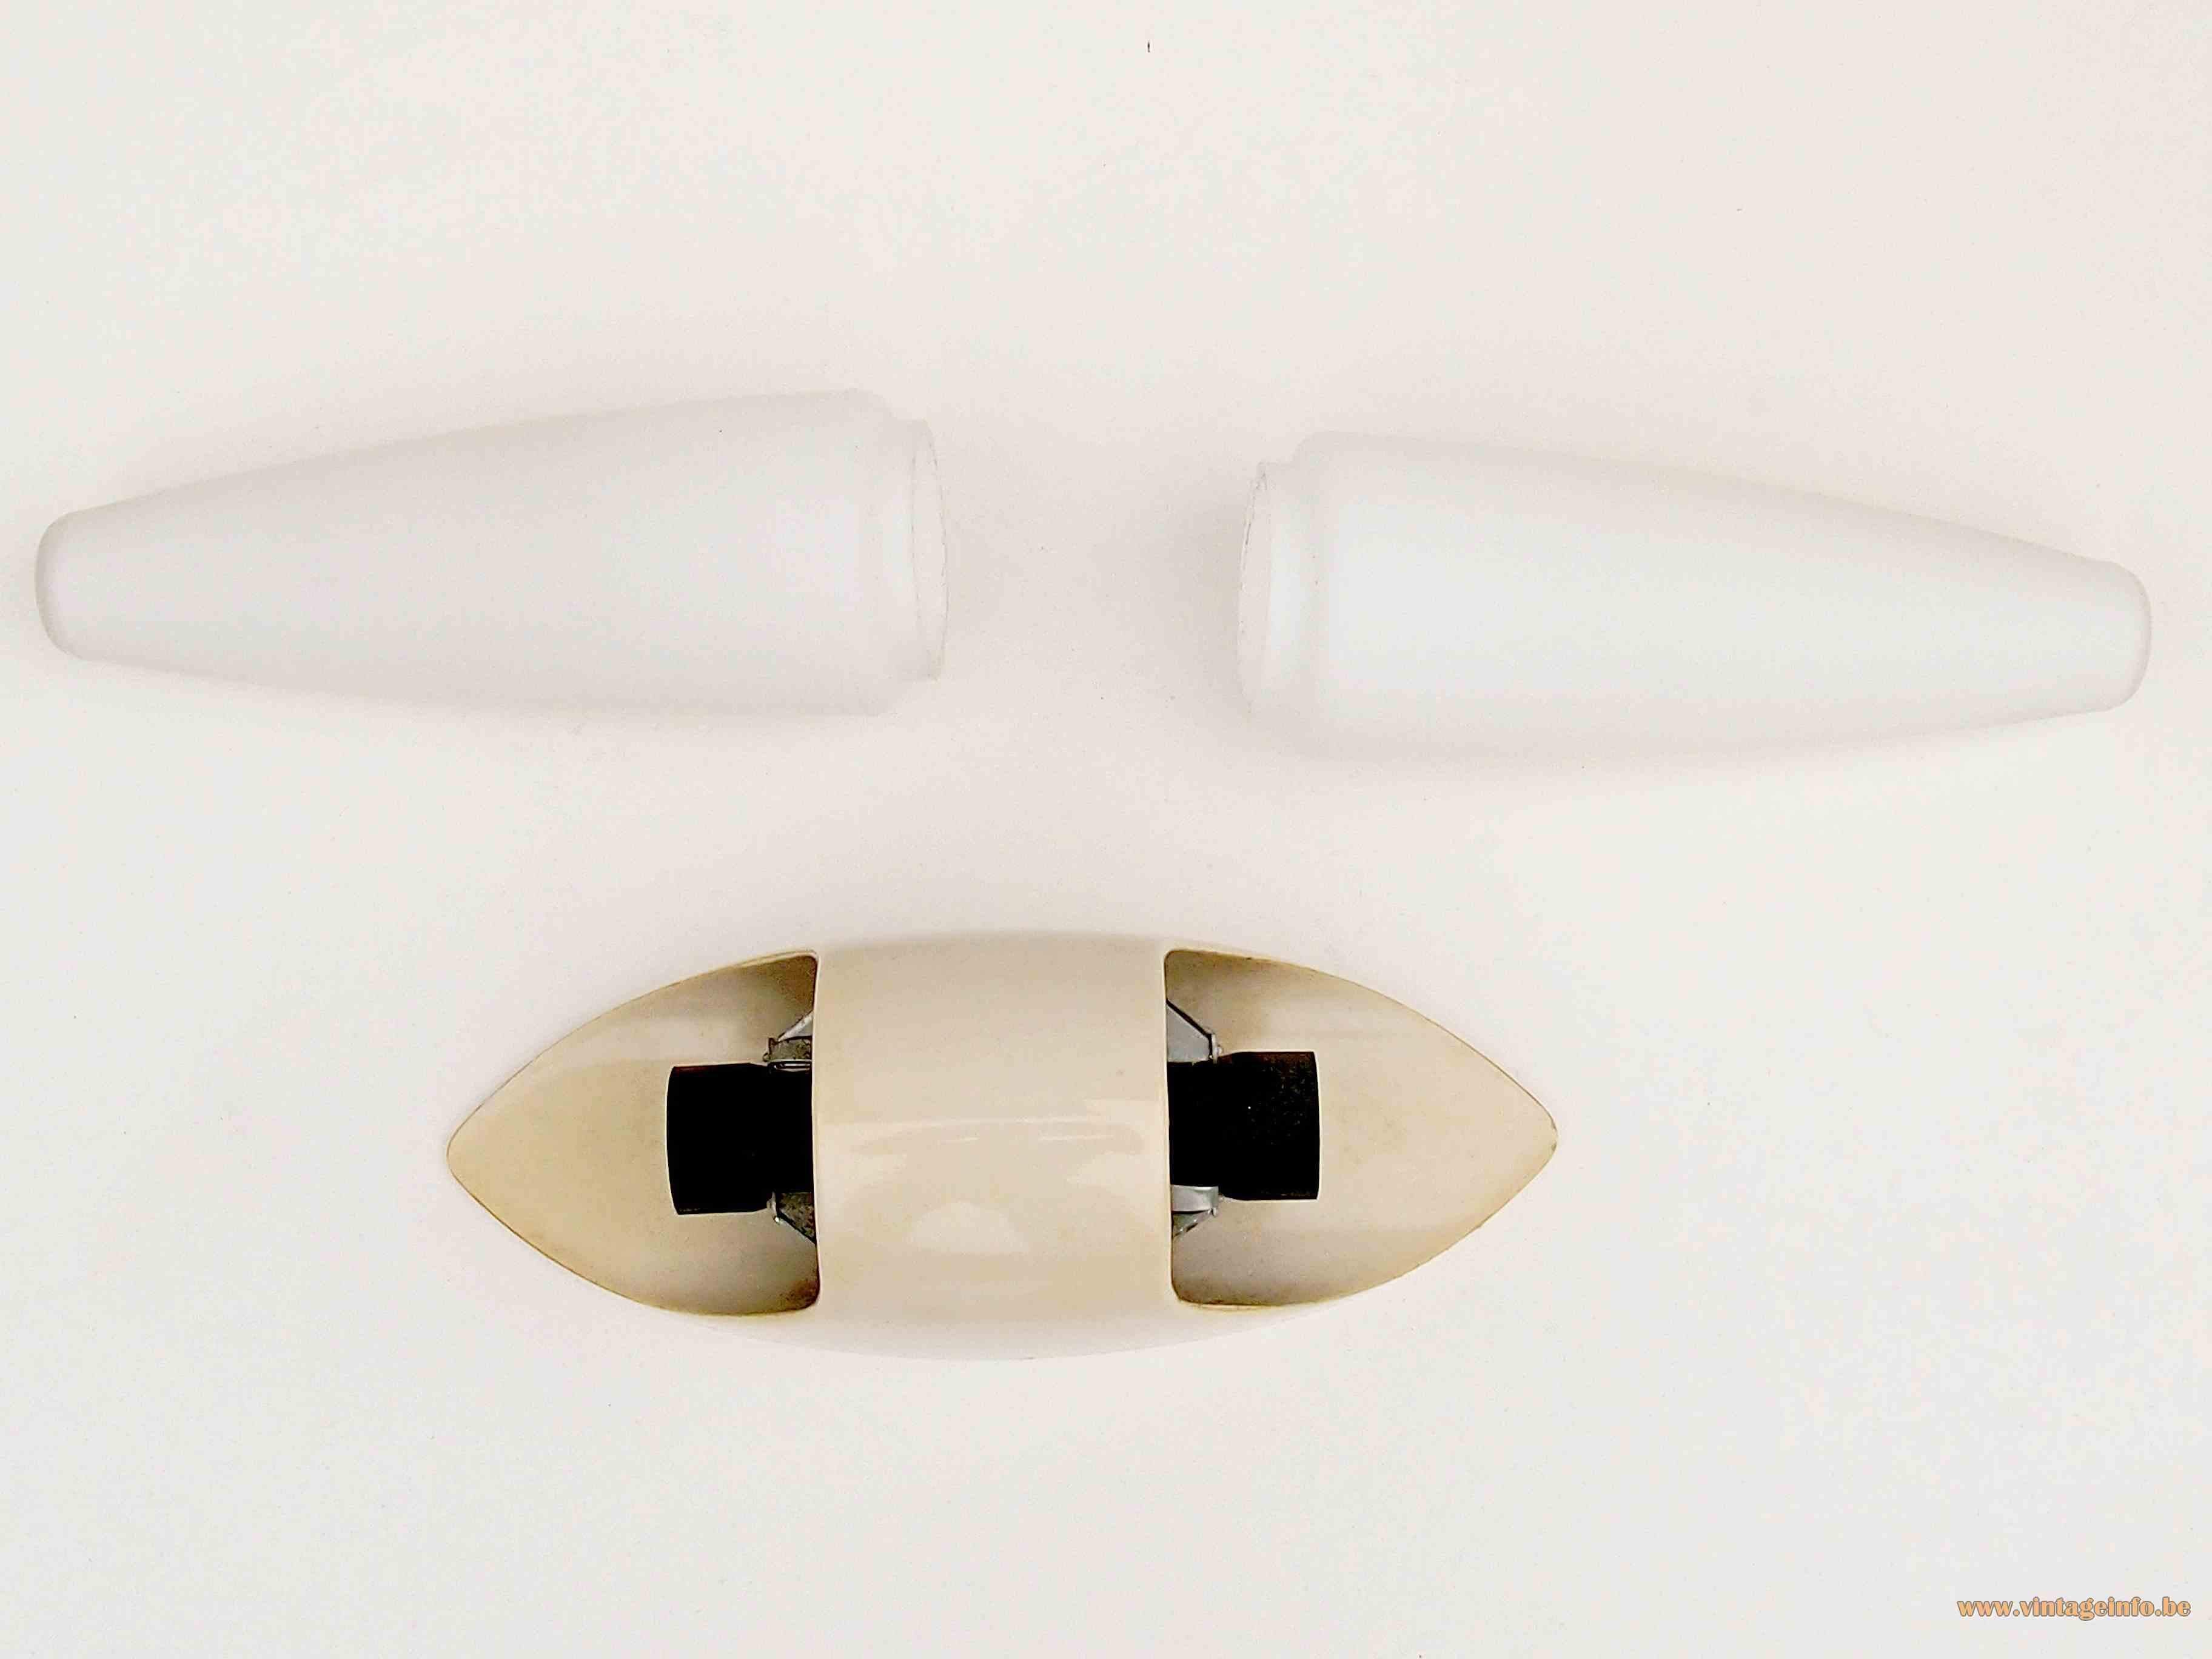 Bo-Niko double wall lamp white Bakelite base mat frosted opal glass lampshades 1960s Belgium Mid-Century Modern